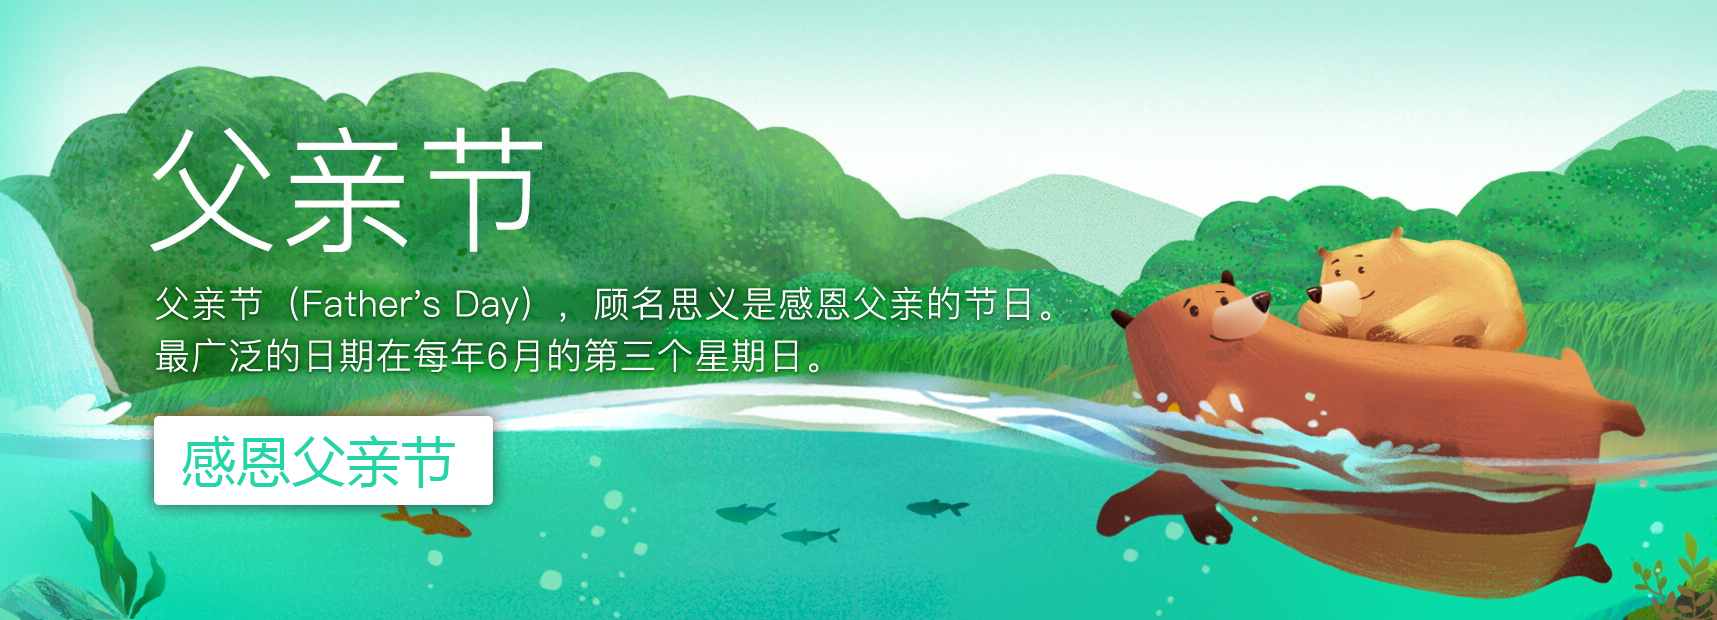 Guangzhou Zhujiang Cable Co., Ltd. wishes all fathers all over the world: Happy, happy and safe!